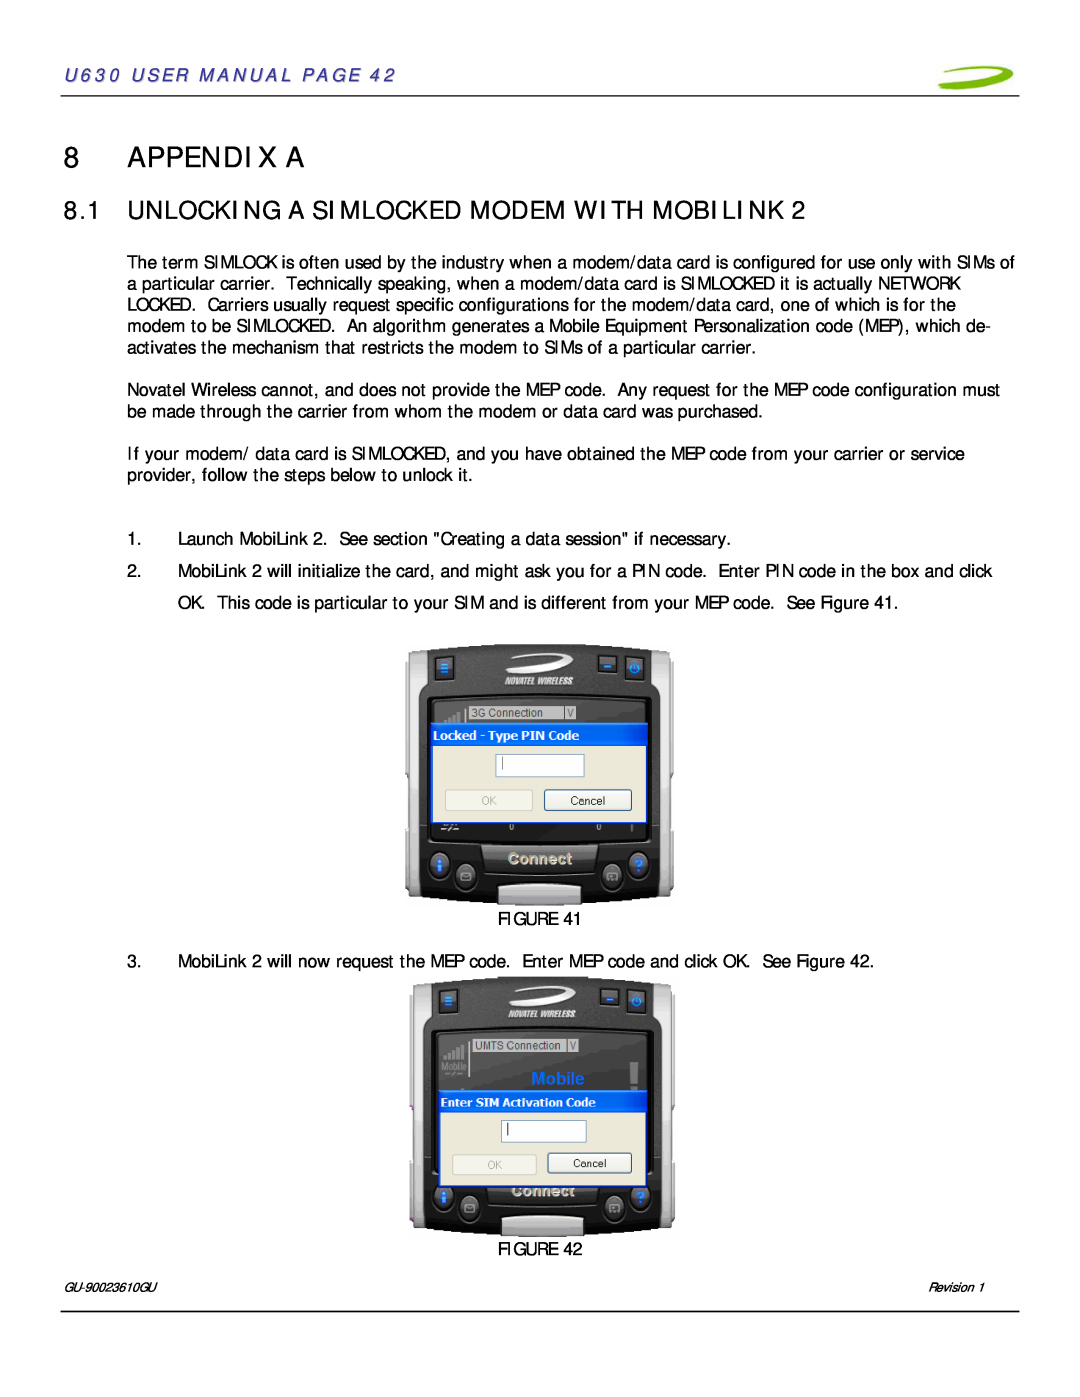 InFocus user manual Appendix A, Unlocking A Simlocked Modem With Mobilink, U630 USER MANUAL PAGE 